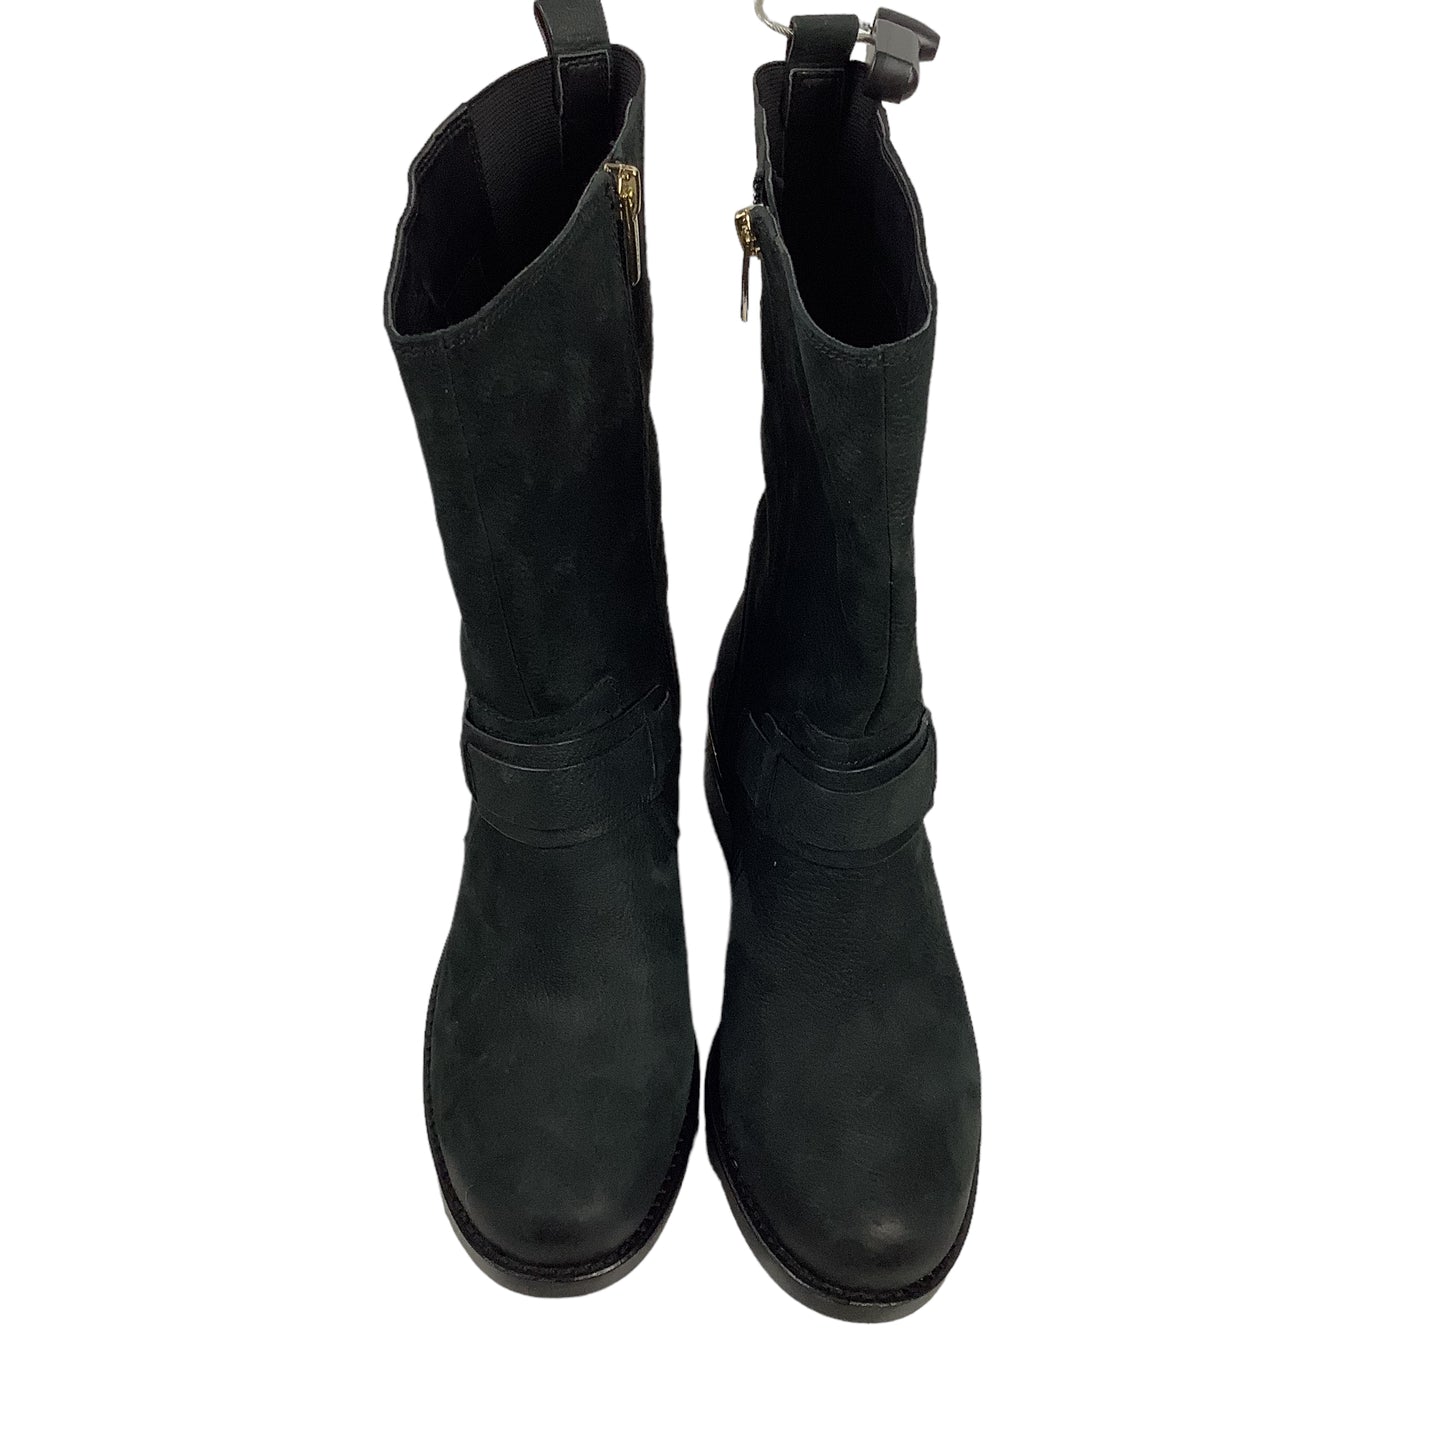 Boots Mid-calf Heels By Vince Camuto  Size: 8.5